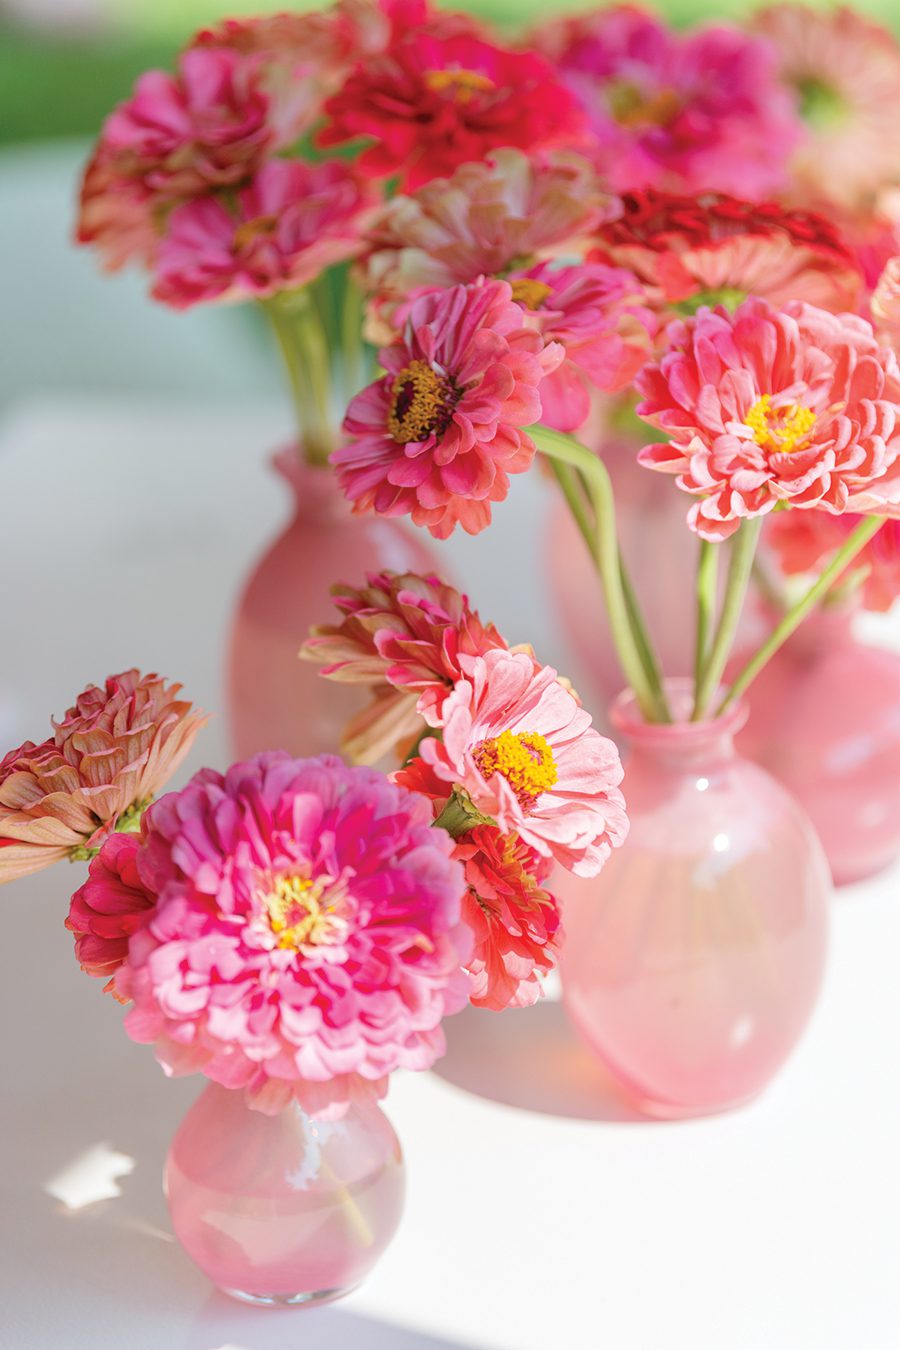 Assorted pink vases full of assorted pink flowers 